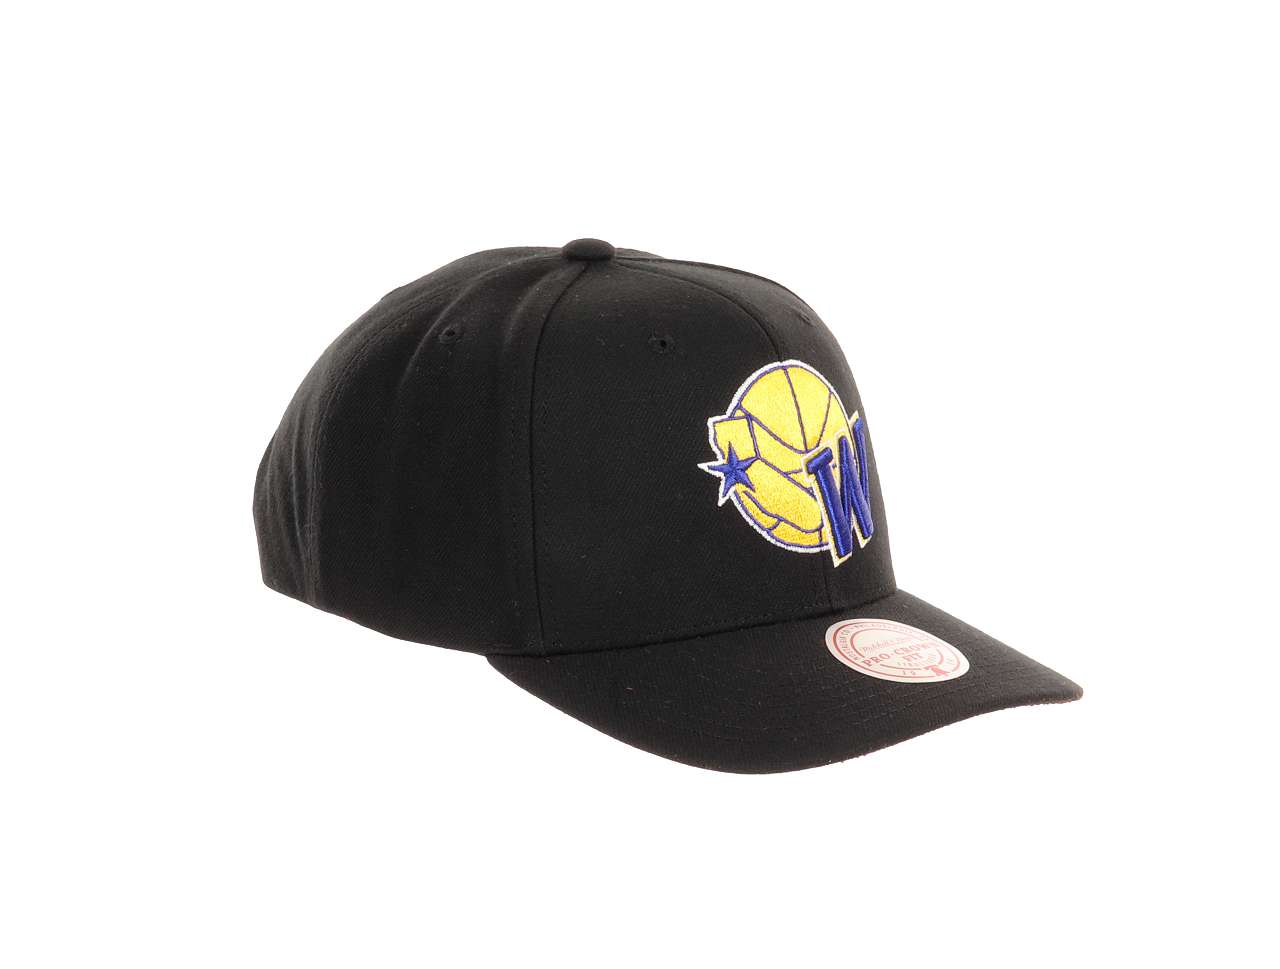 Golden State Warriors NBA Icon Grail Pro Snapback Hardwood Claasic Cap Pro Crown Fit Black Mitchell & Ness